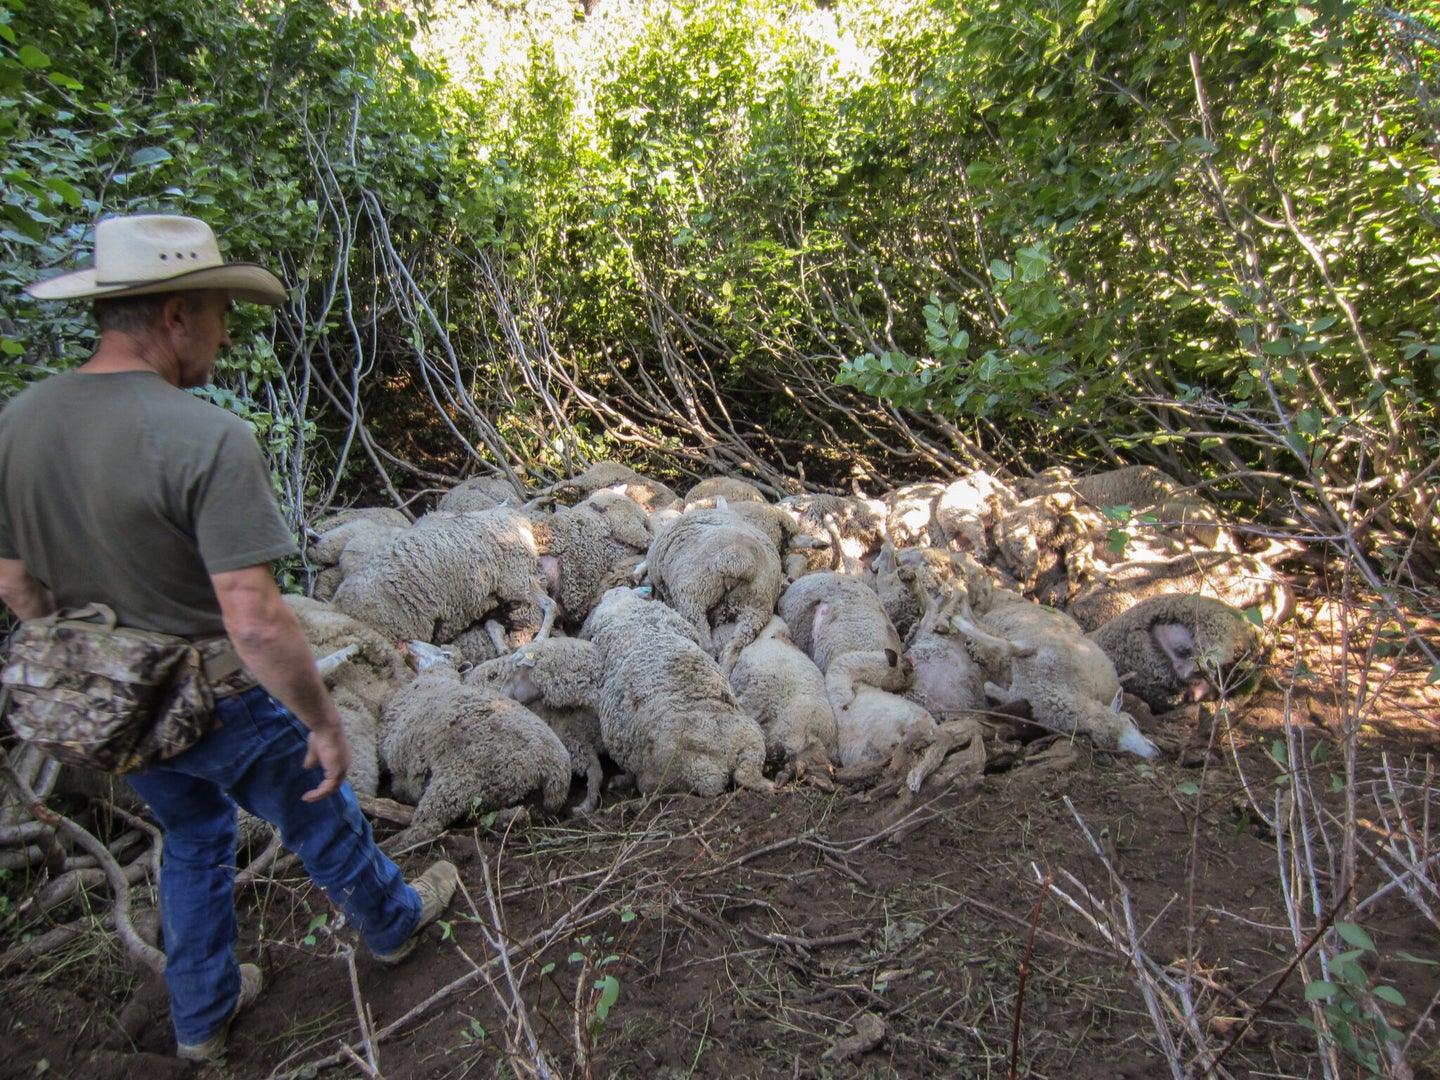 man approaches pile of dead sheep